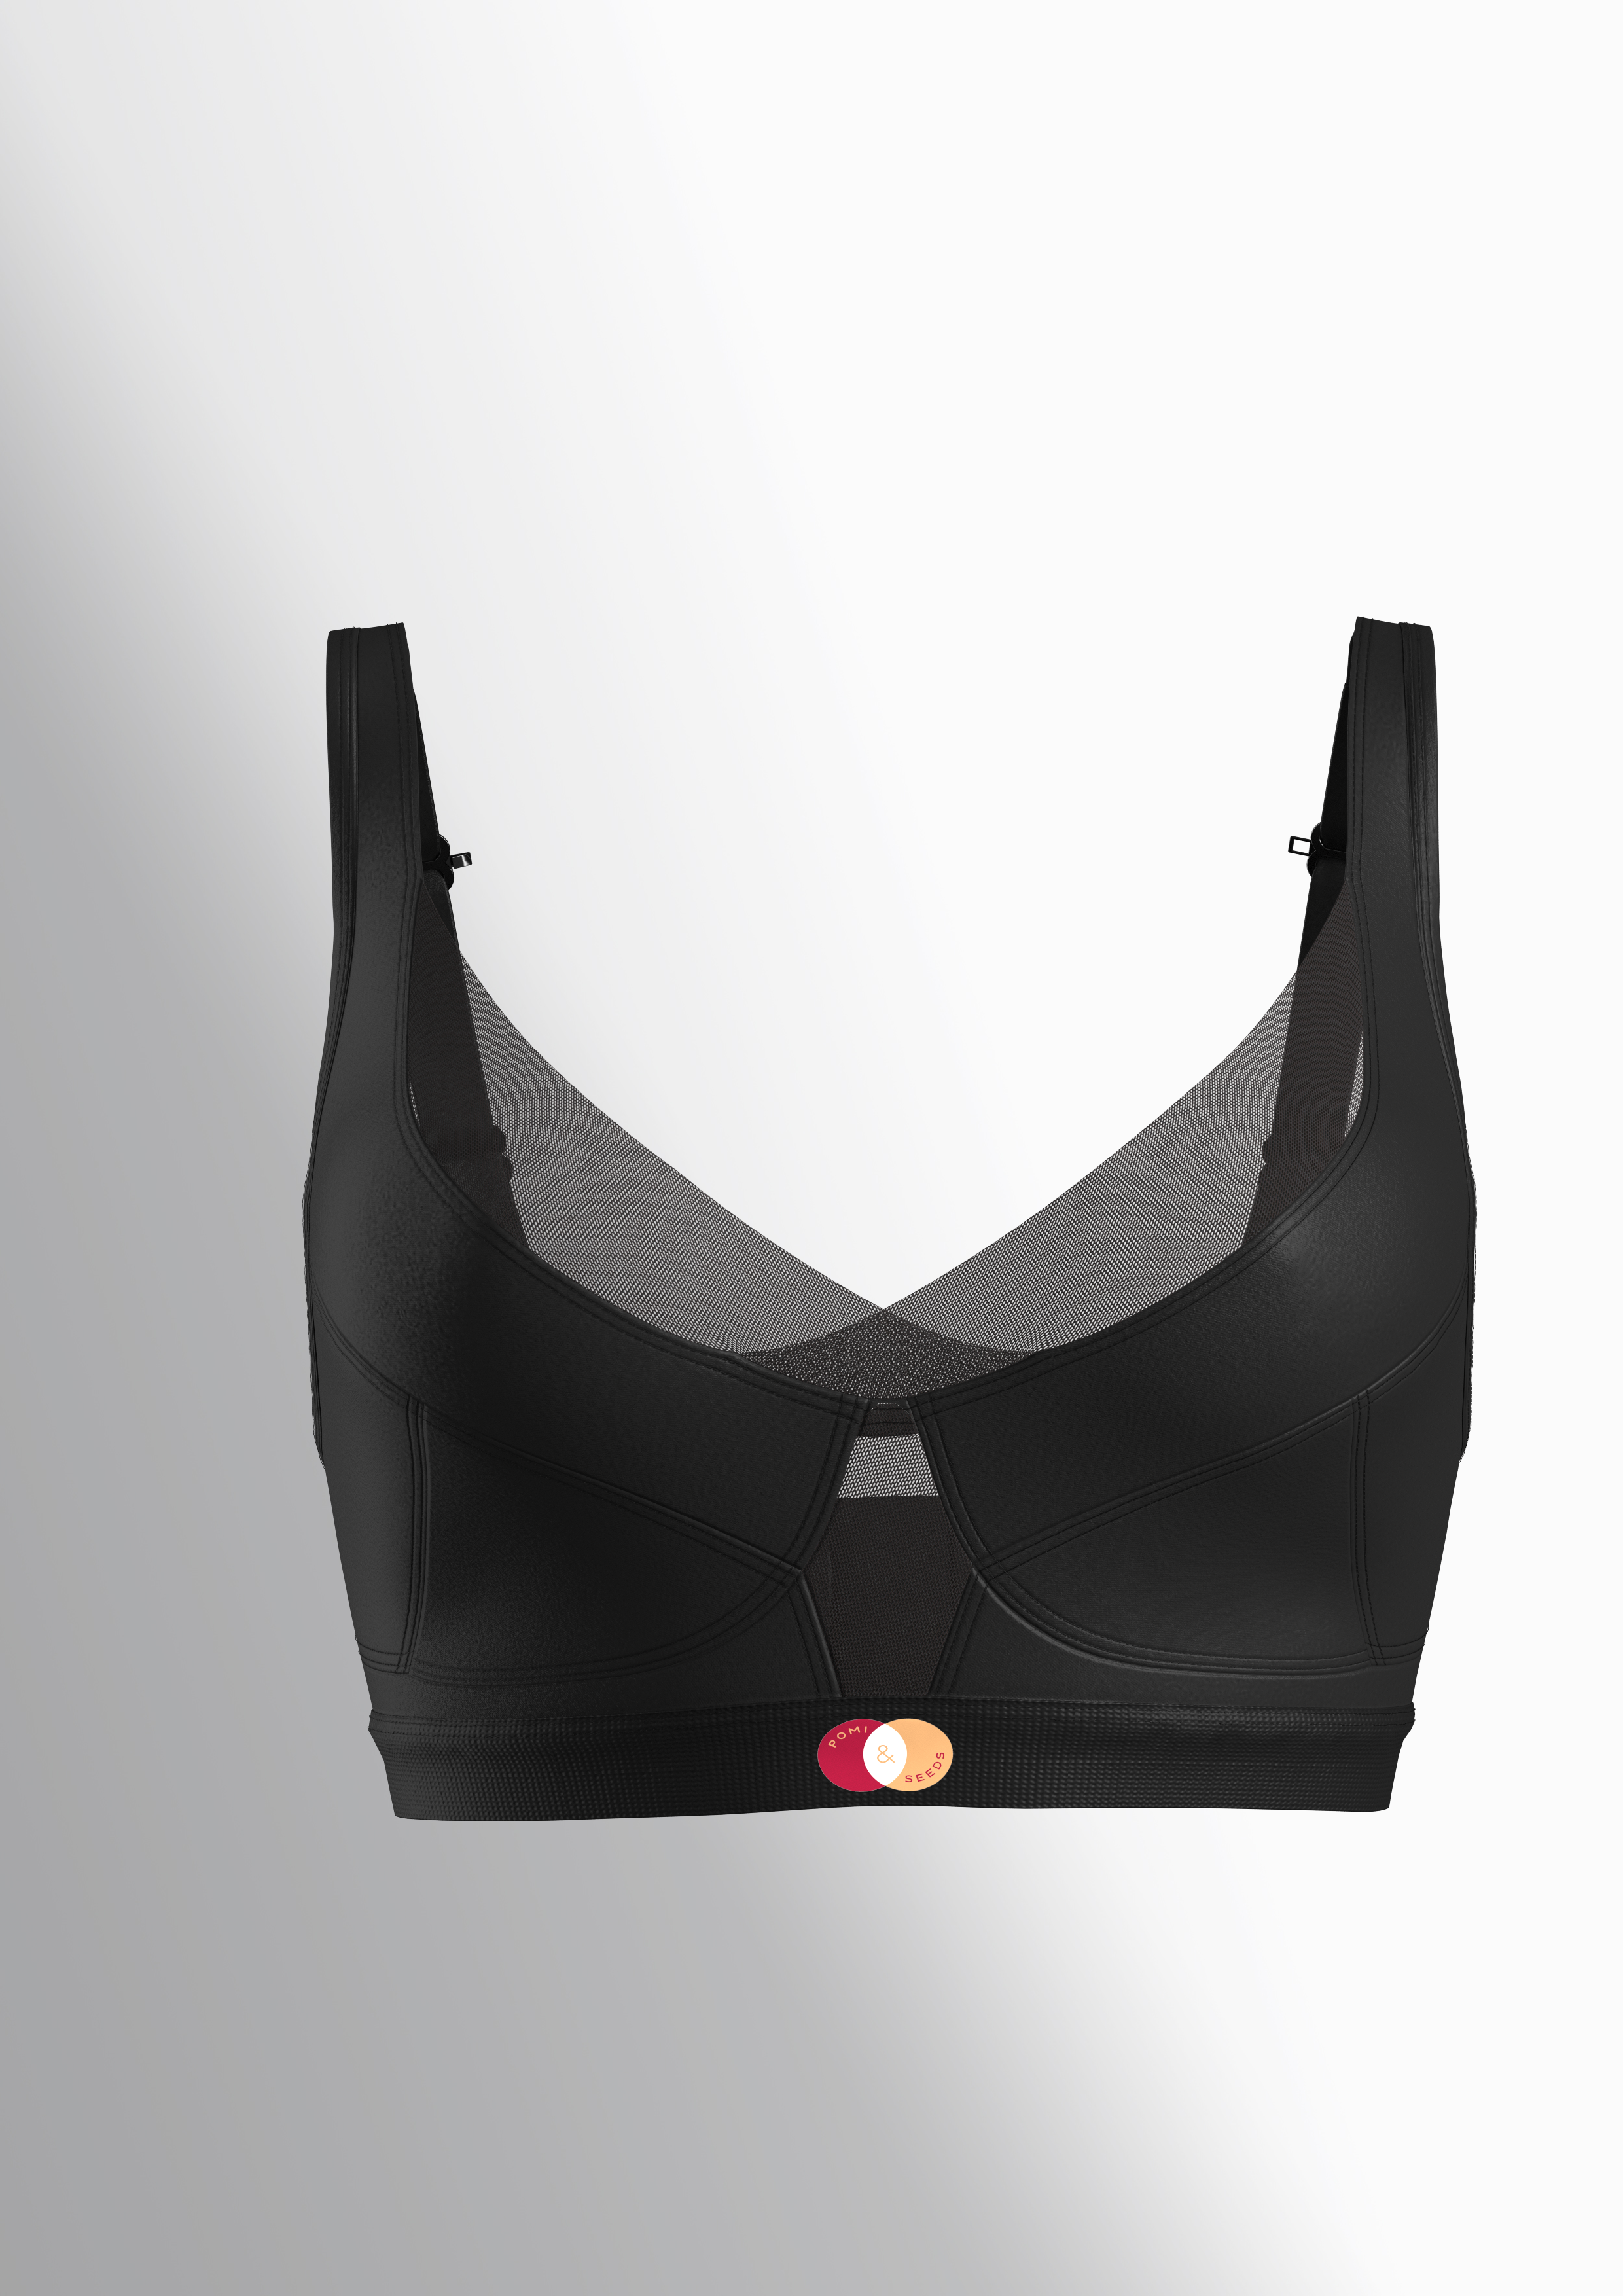 Load video: 3D revolving image of your new bra